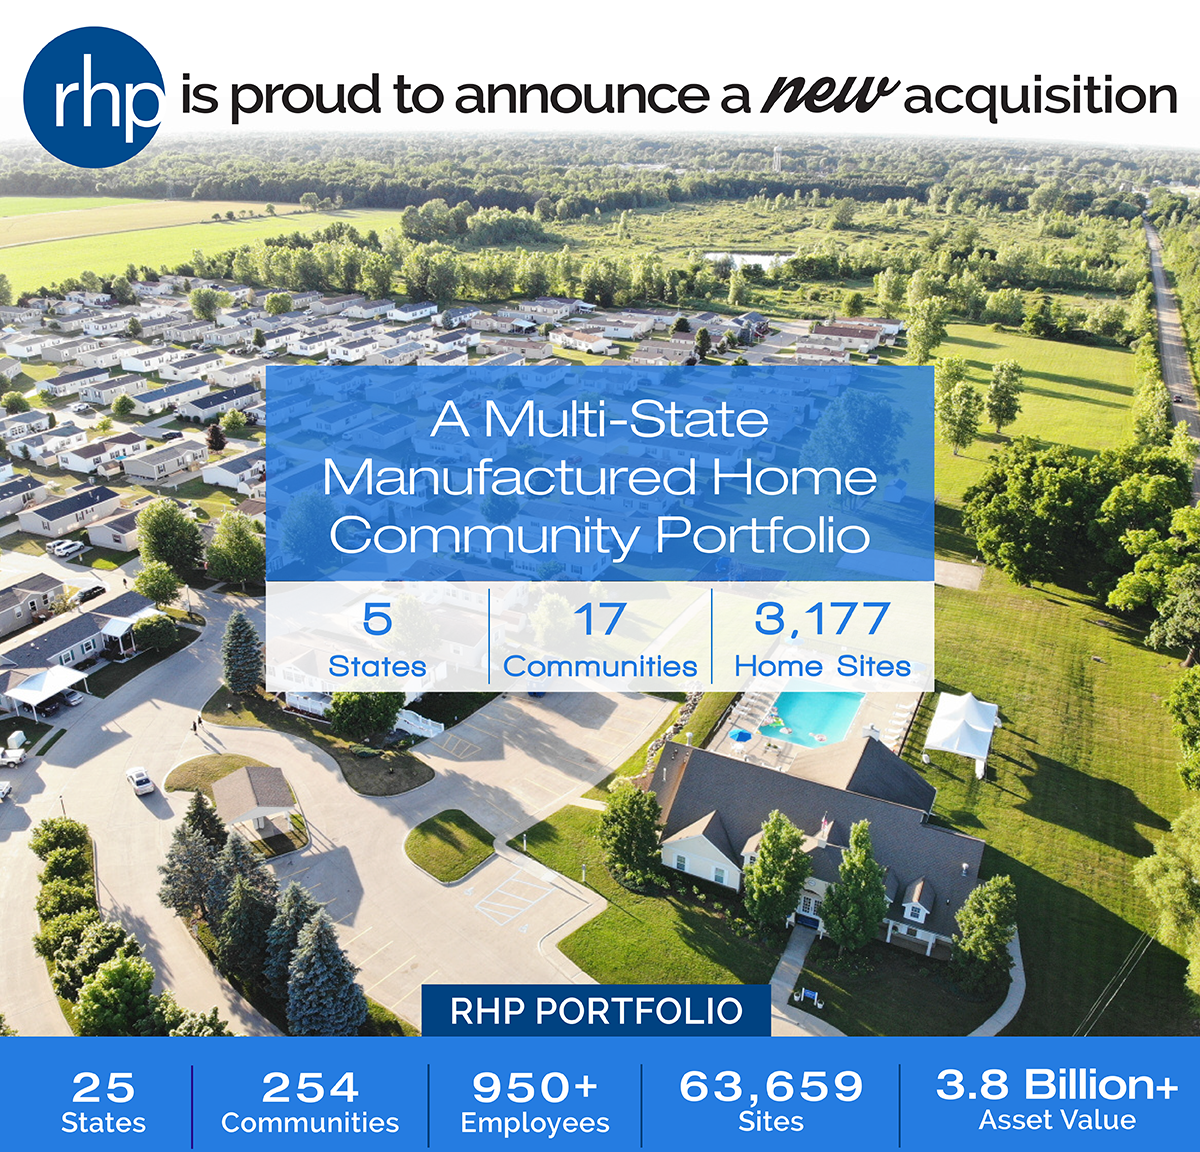 RHP Properties Announces the Purchase of 17 Manufactured Home Communities in Five States for $170M